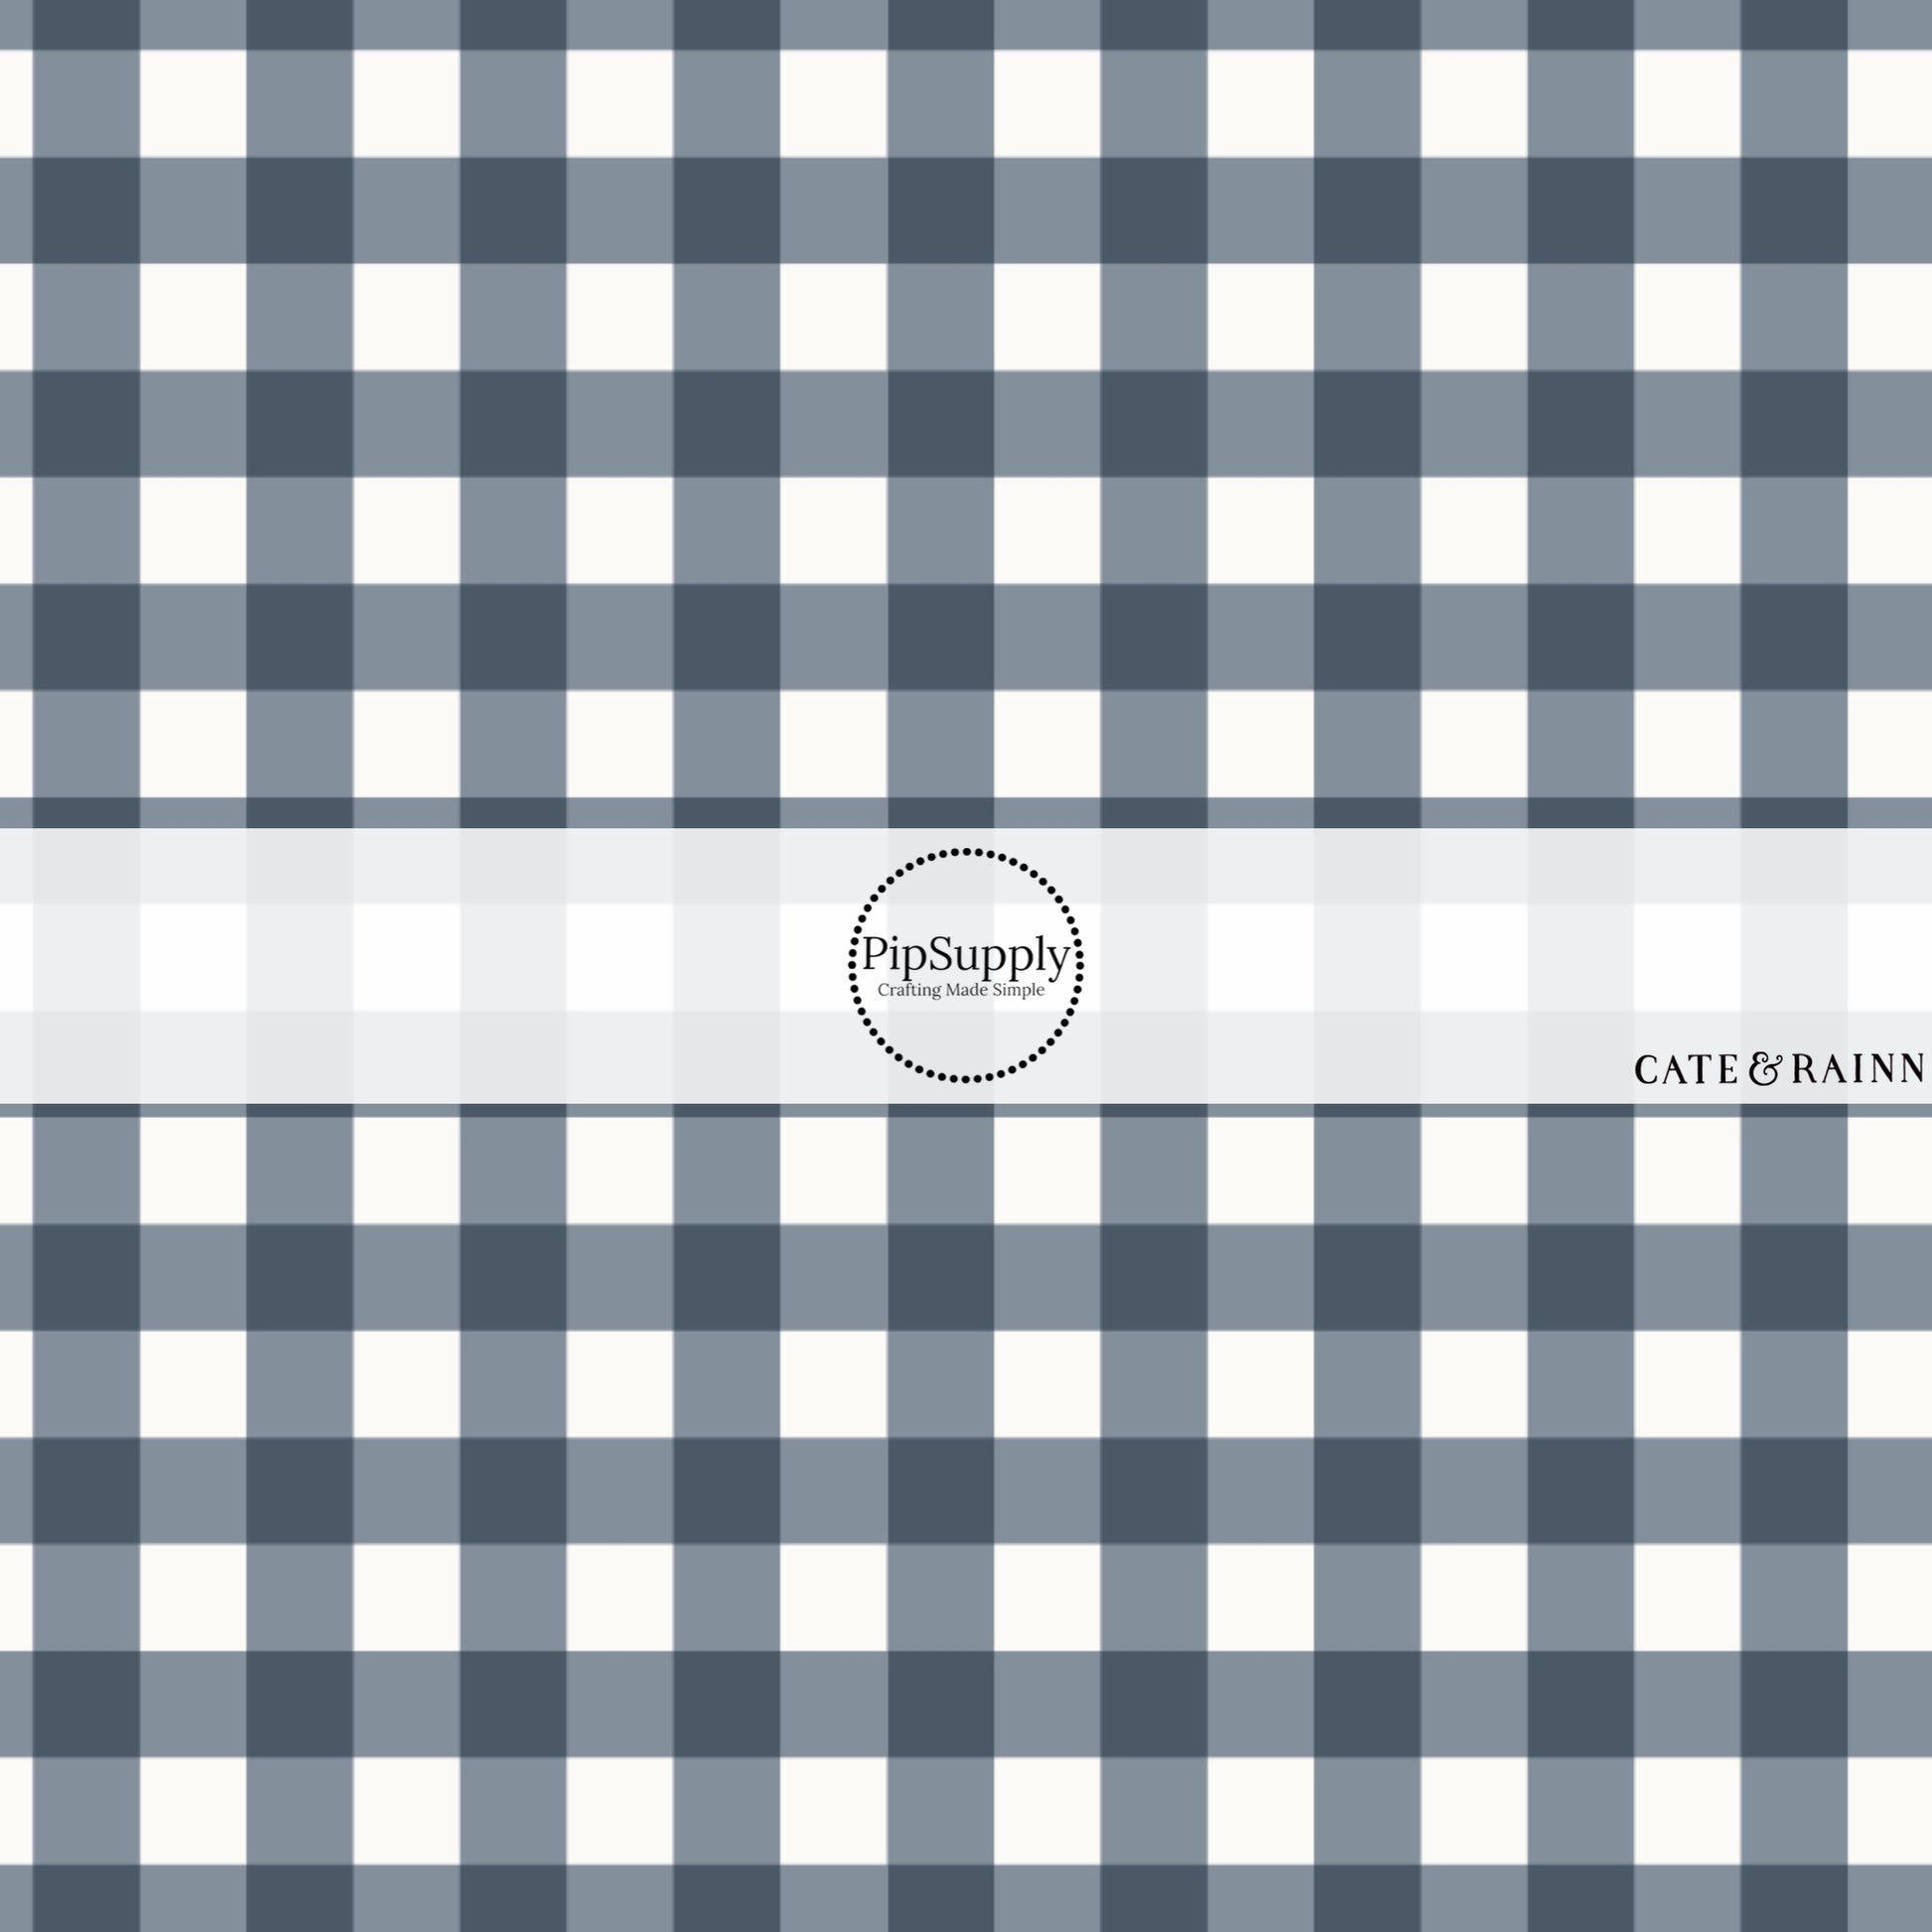 These spring and summer pattern fabric by the yard features farm and meadow plaid and stripe patterns. This fun fabric can be used for all your sewing and crafting needs!